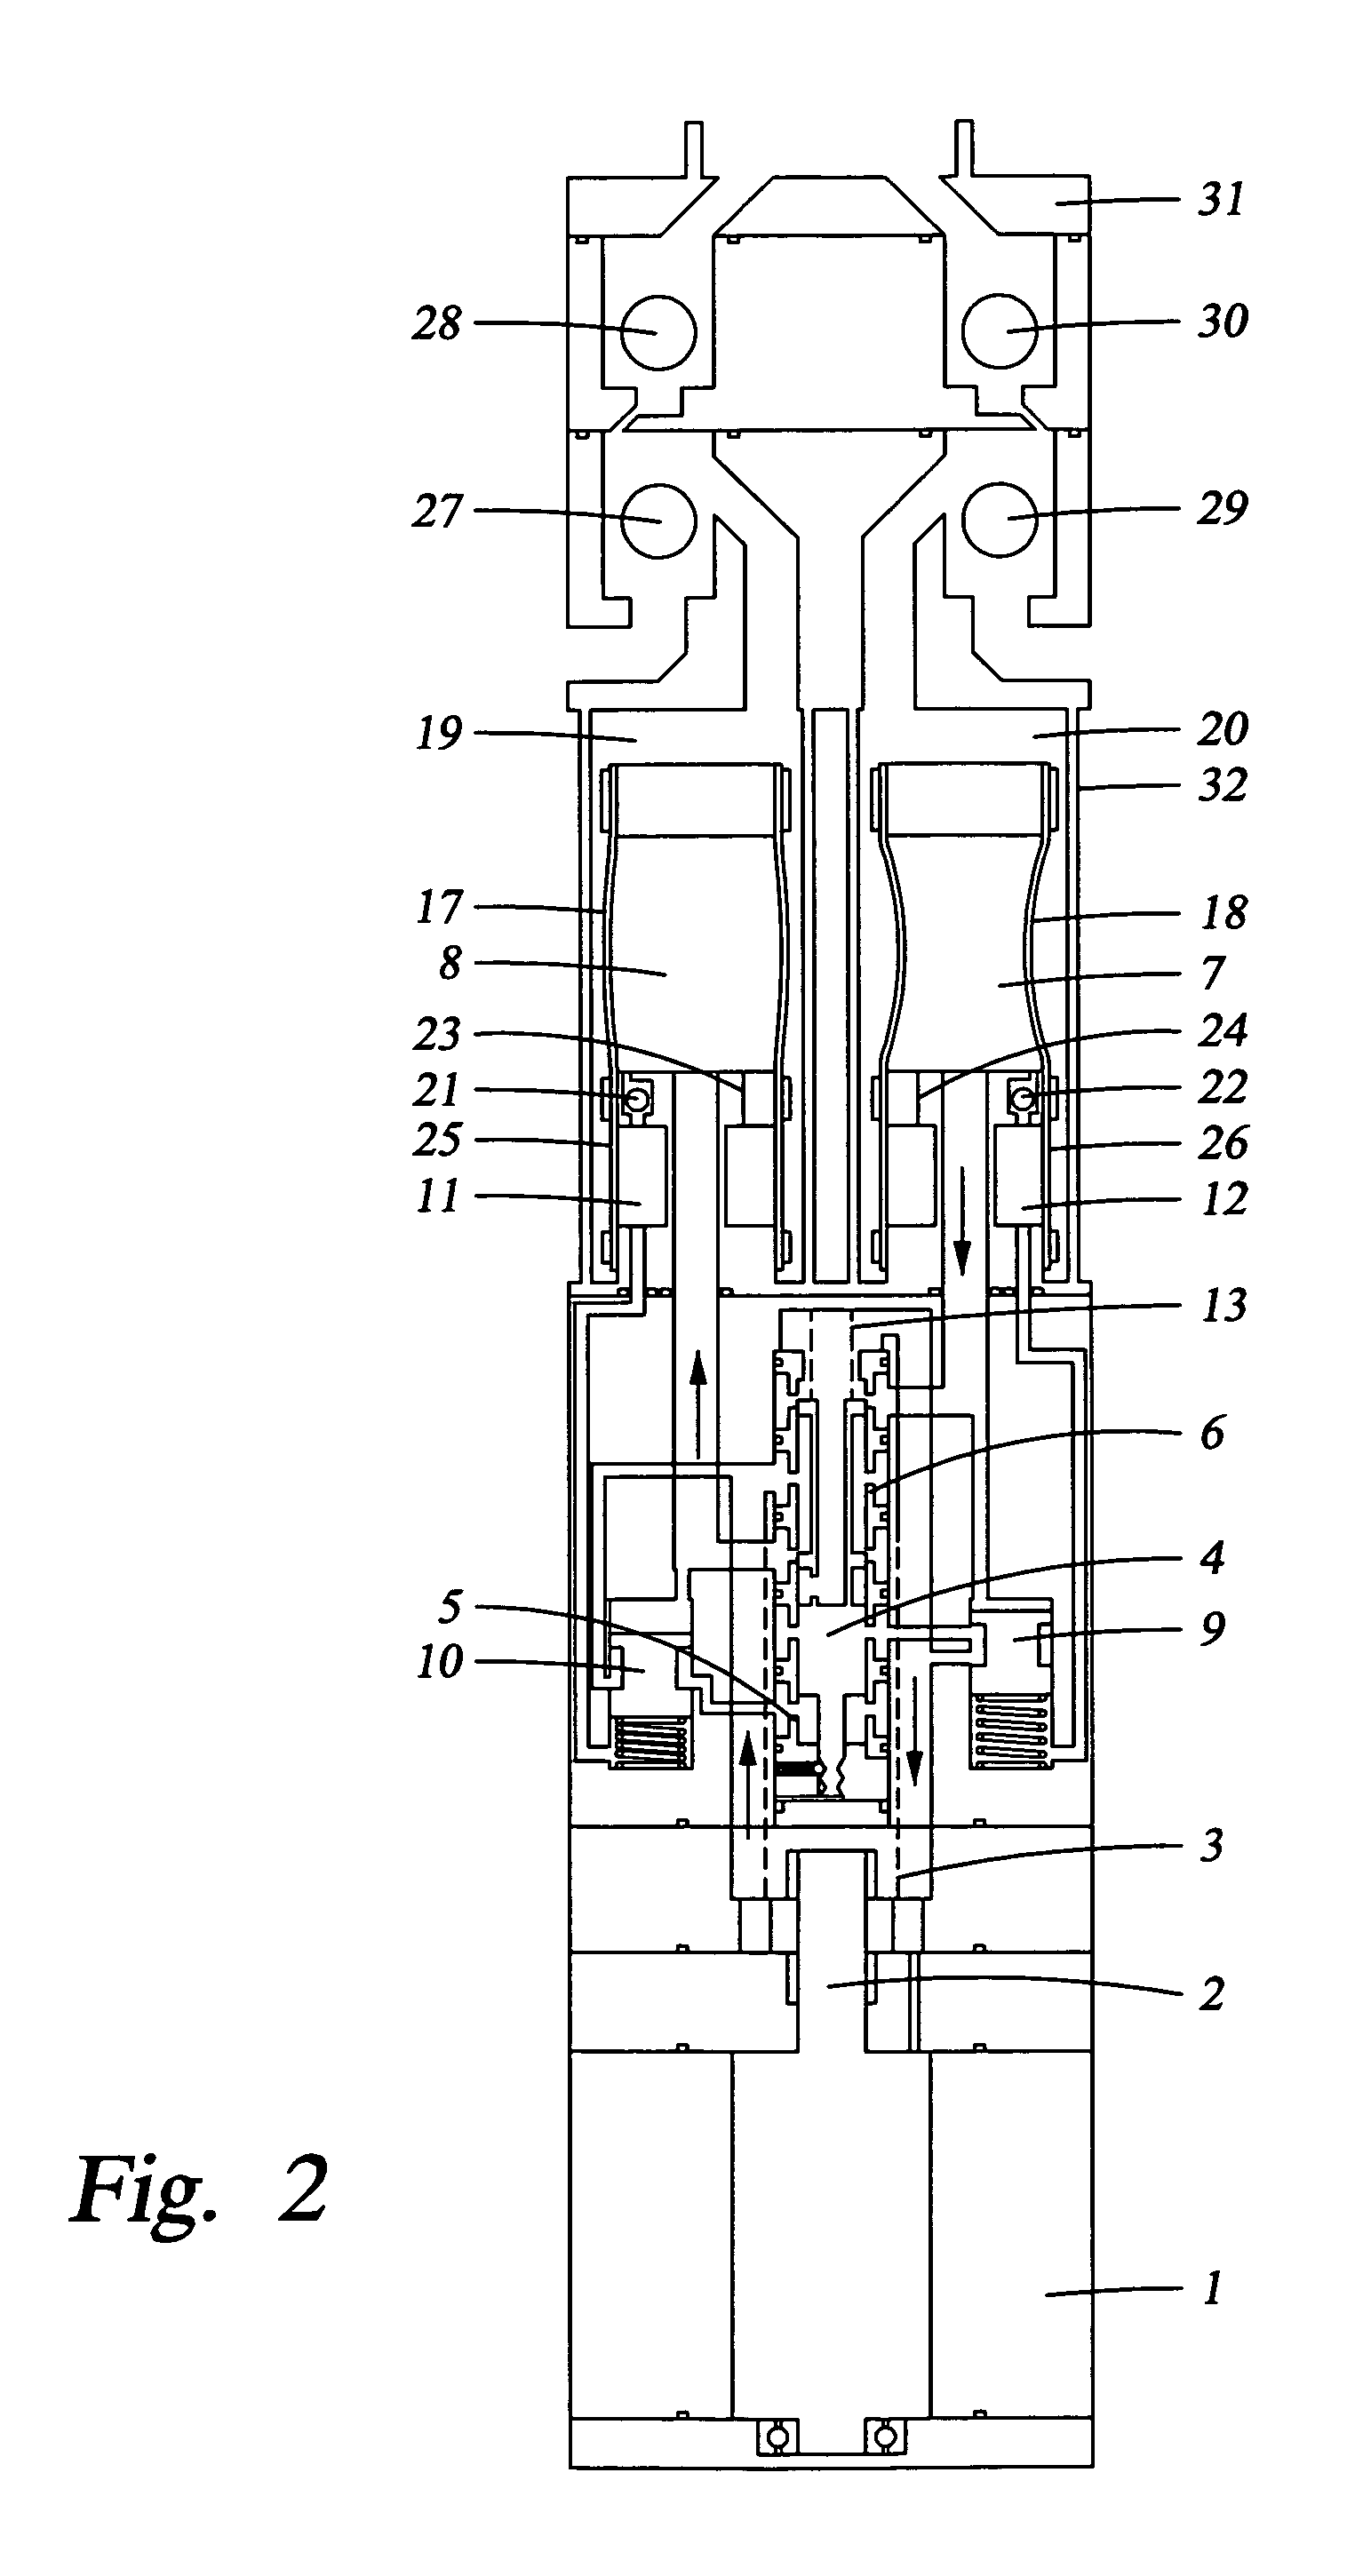 Submersible well pumping system with improved flow switching mechanism